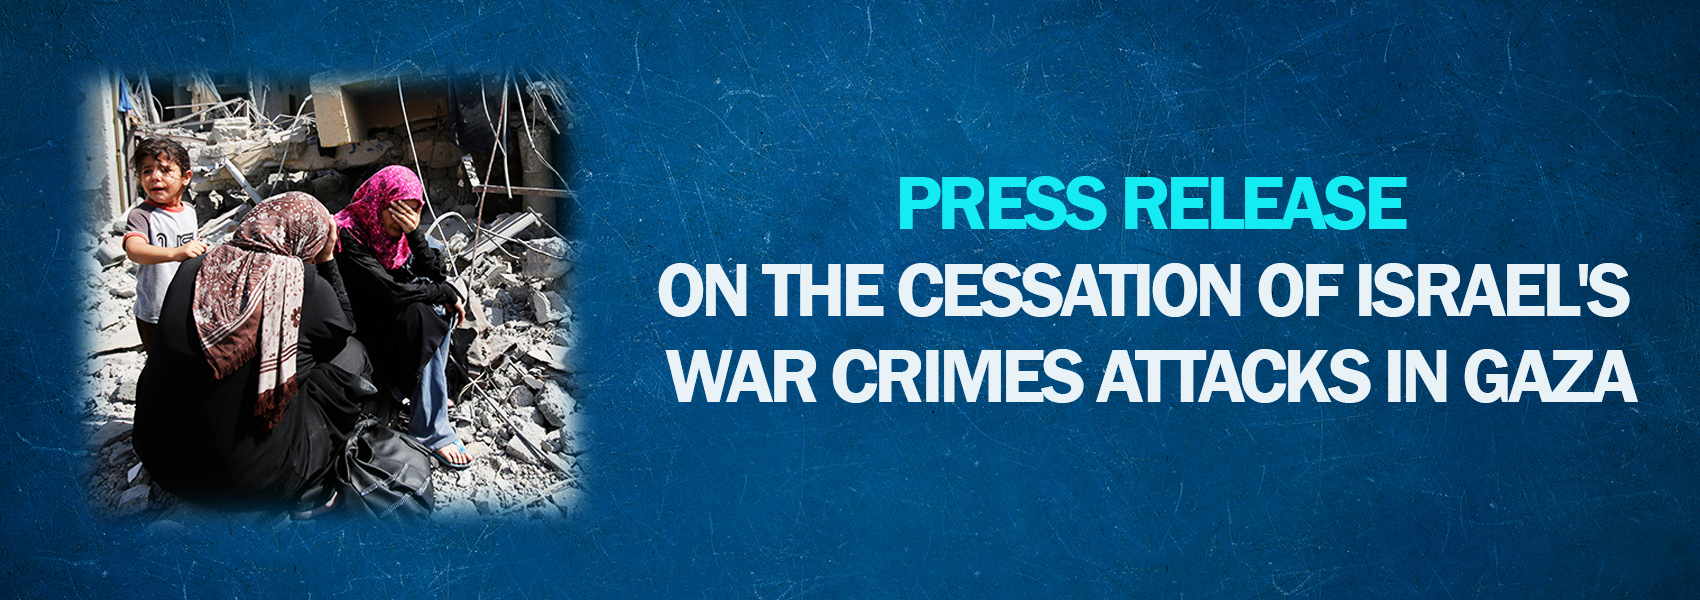  Press Release on The Cessation of Israel's War Crimes Attacks in Gaza